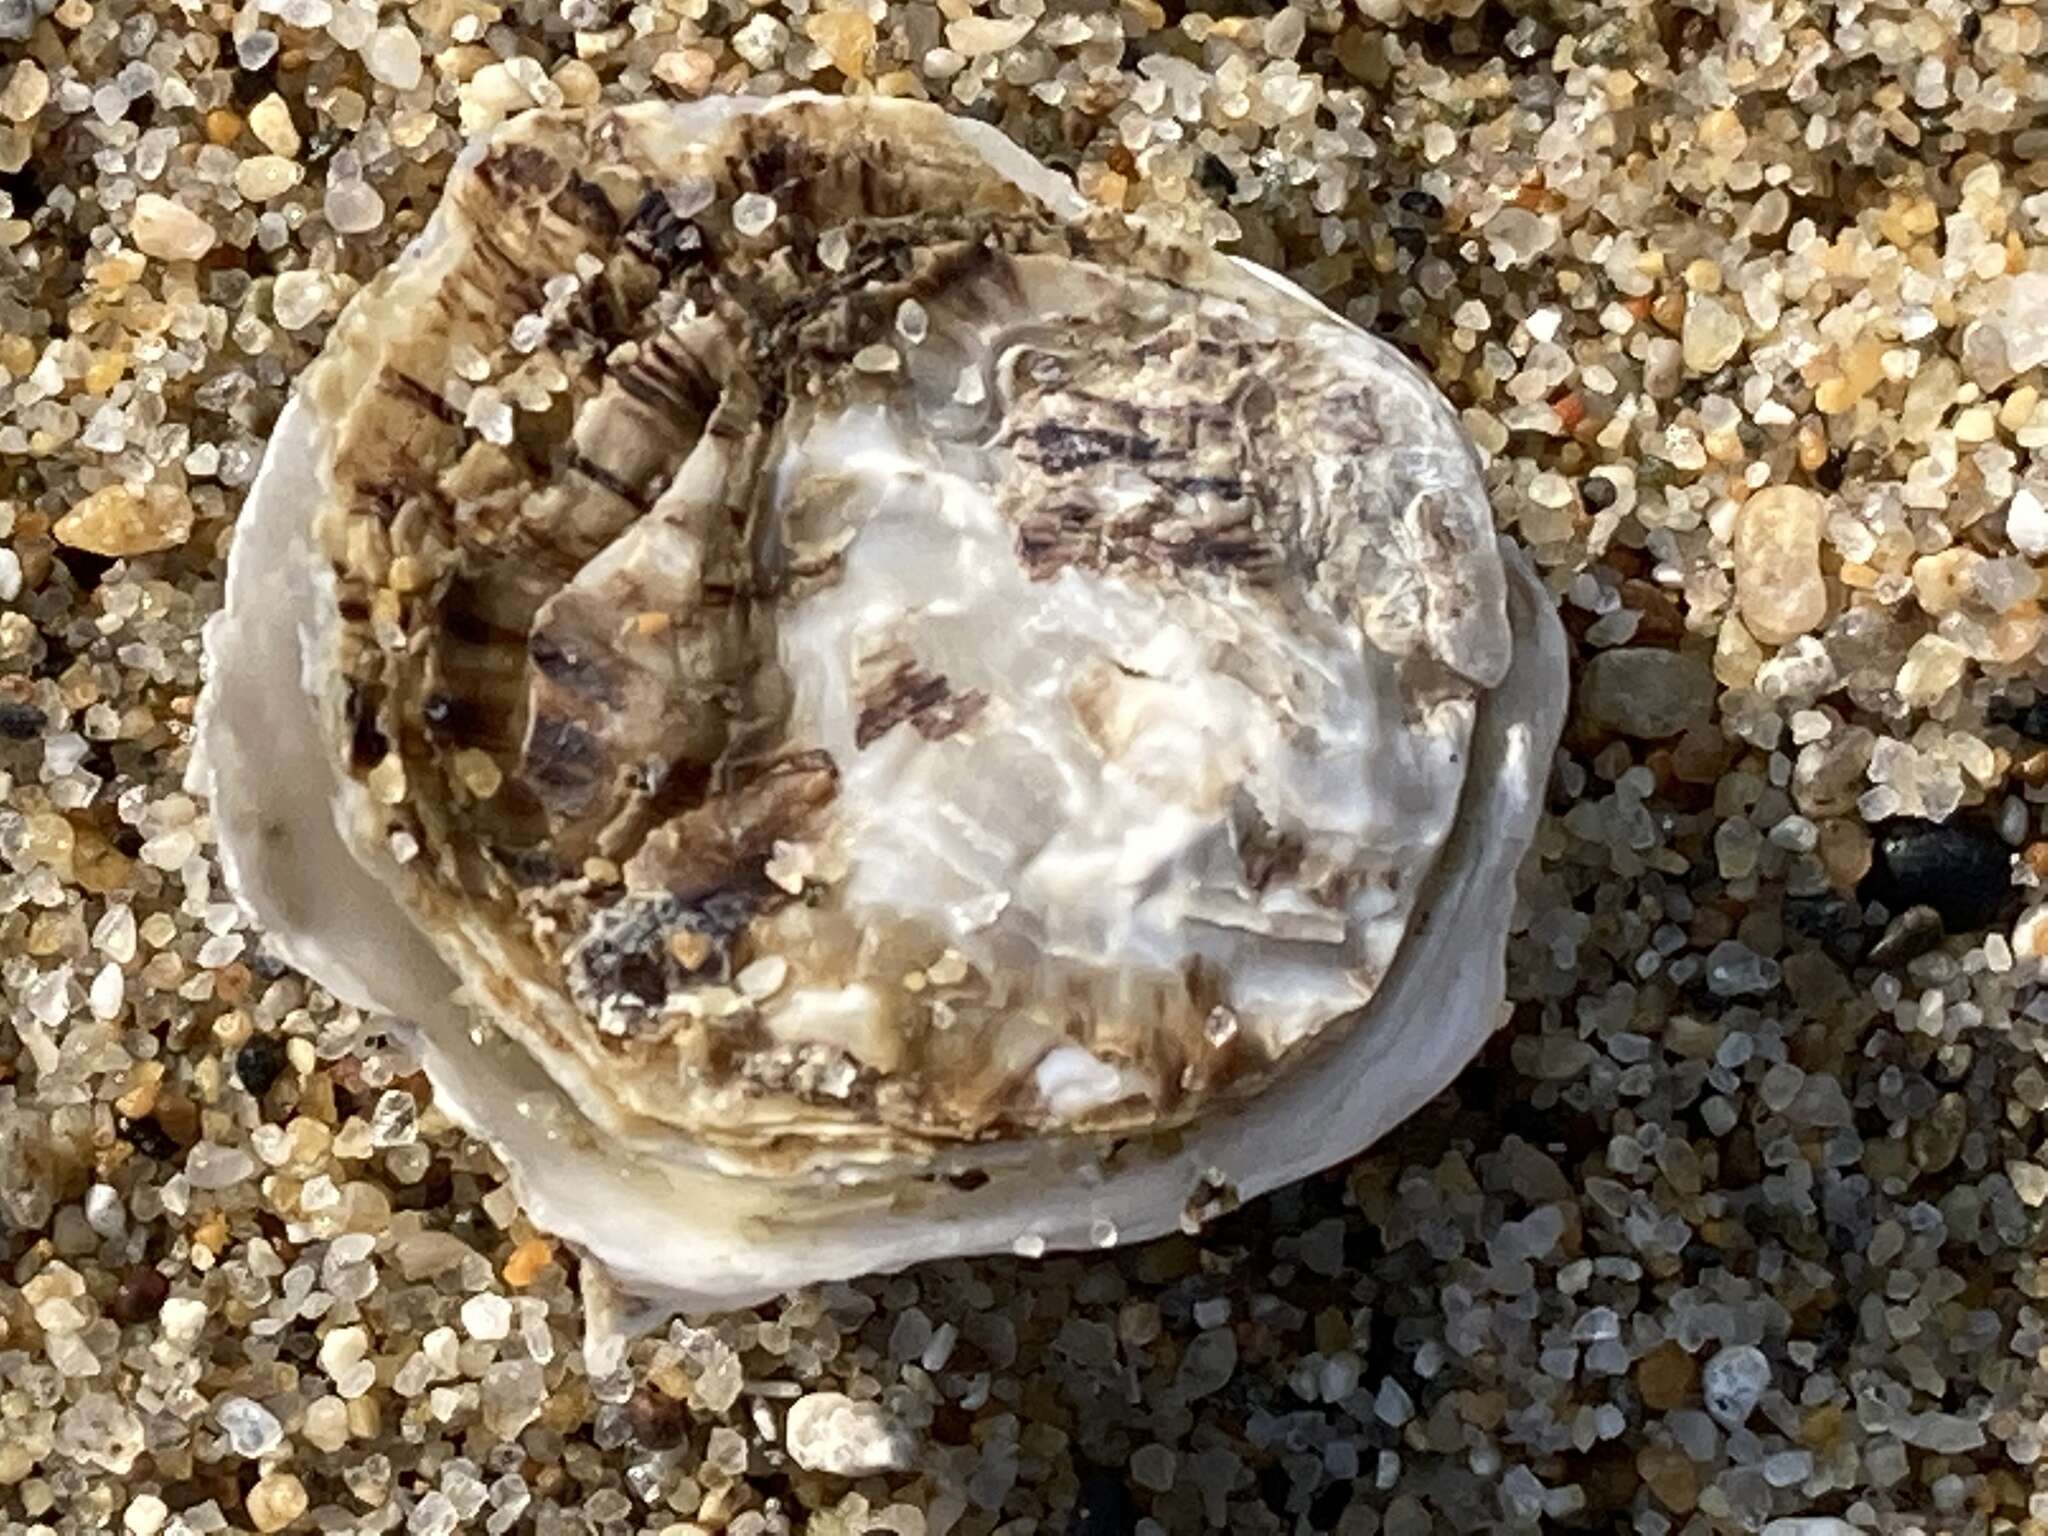 Image of Olympia oyster